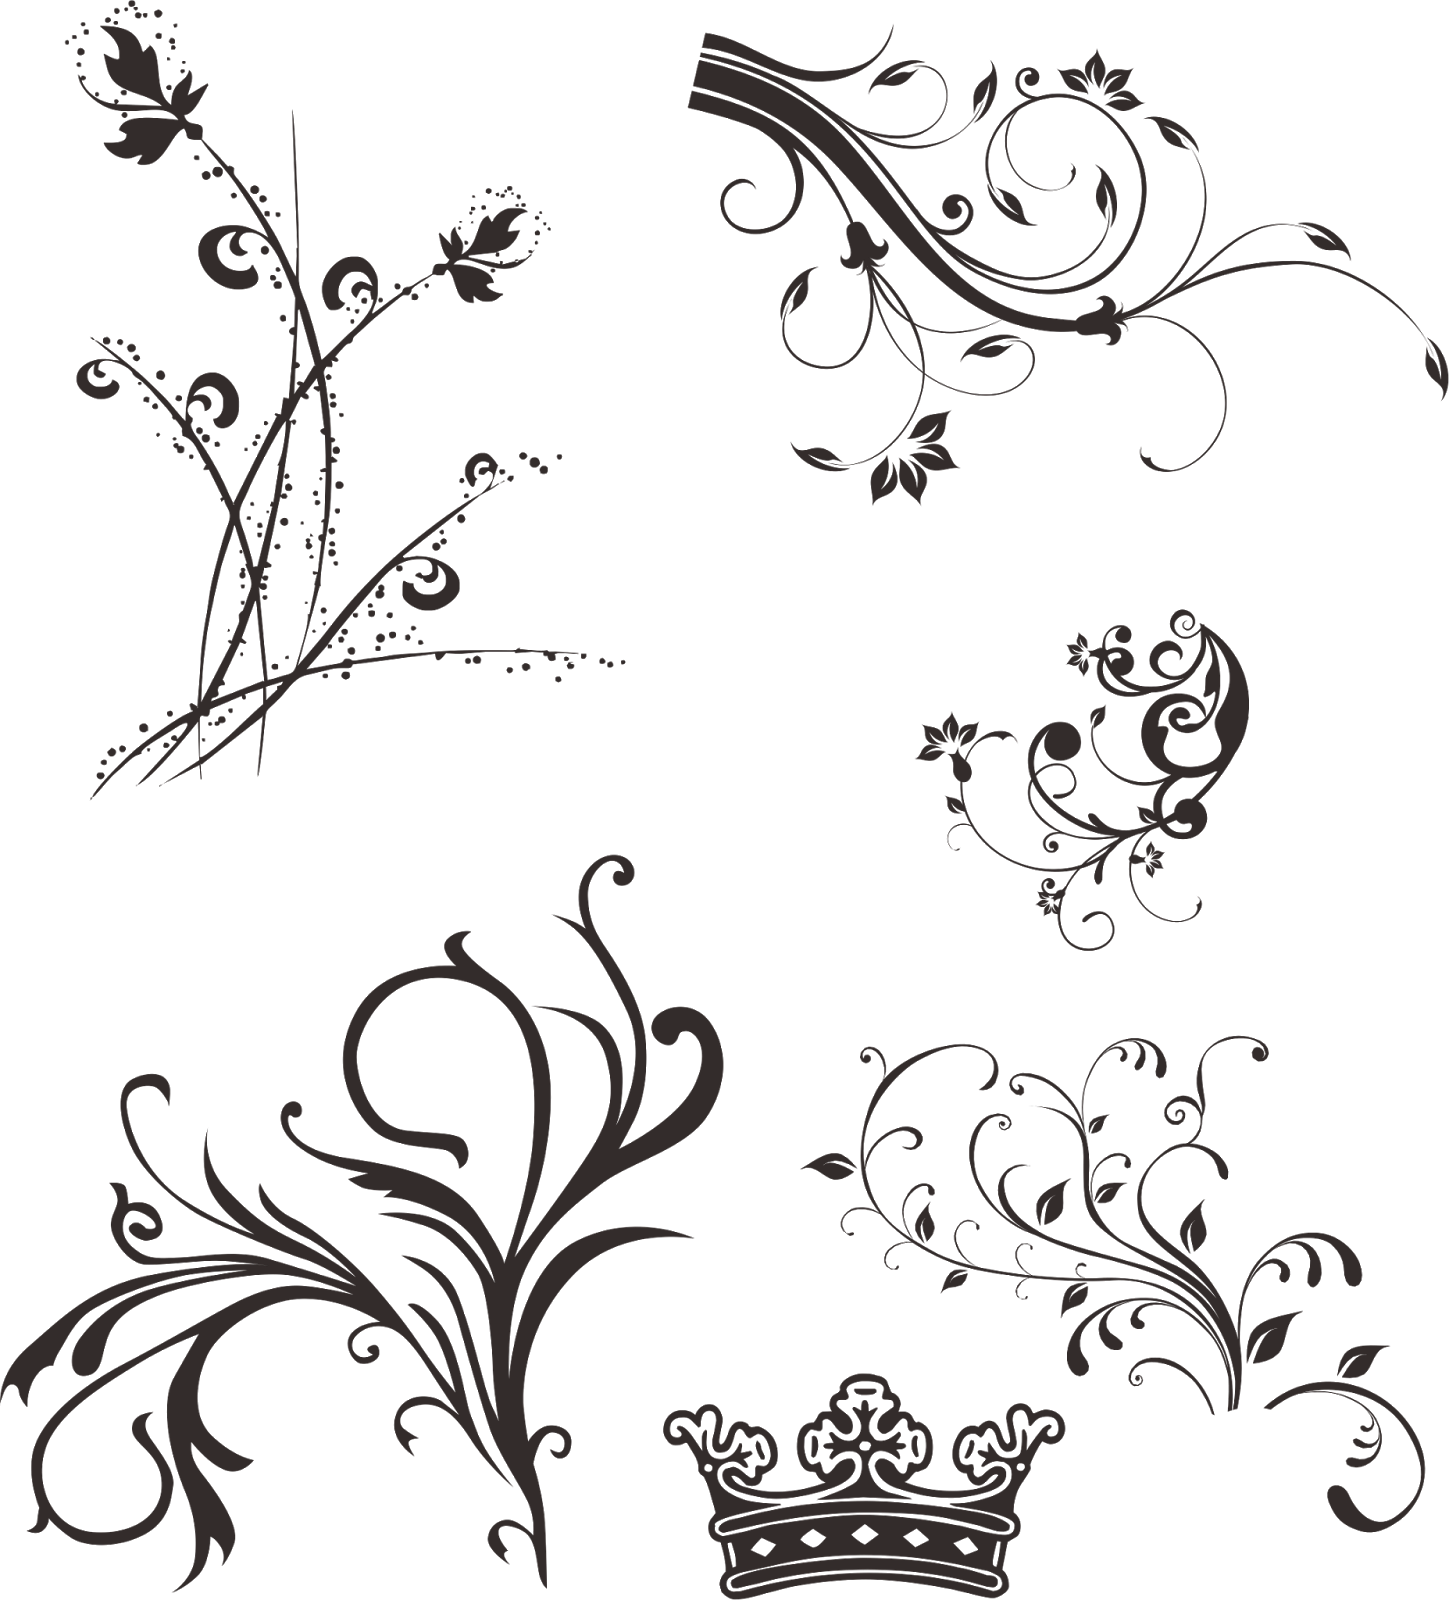 A Black Background With Different Designs